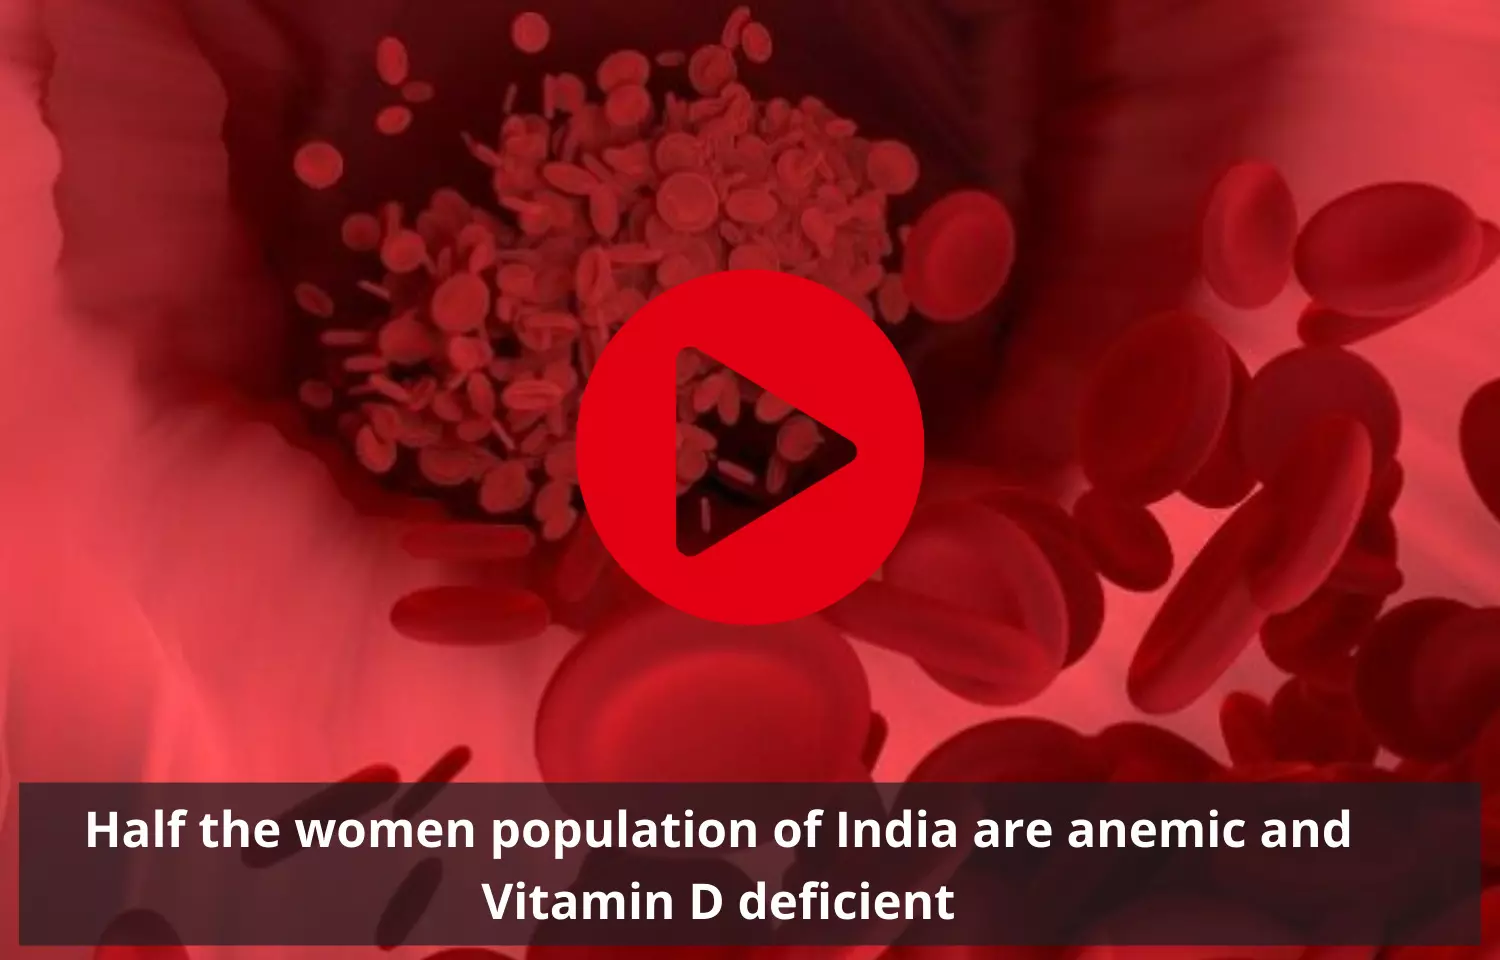 Half the women population of India are anemic and Vitamin D deficient